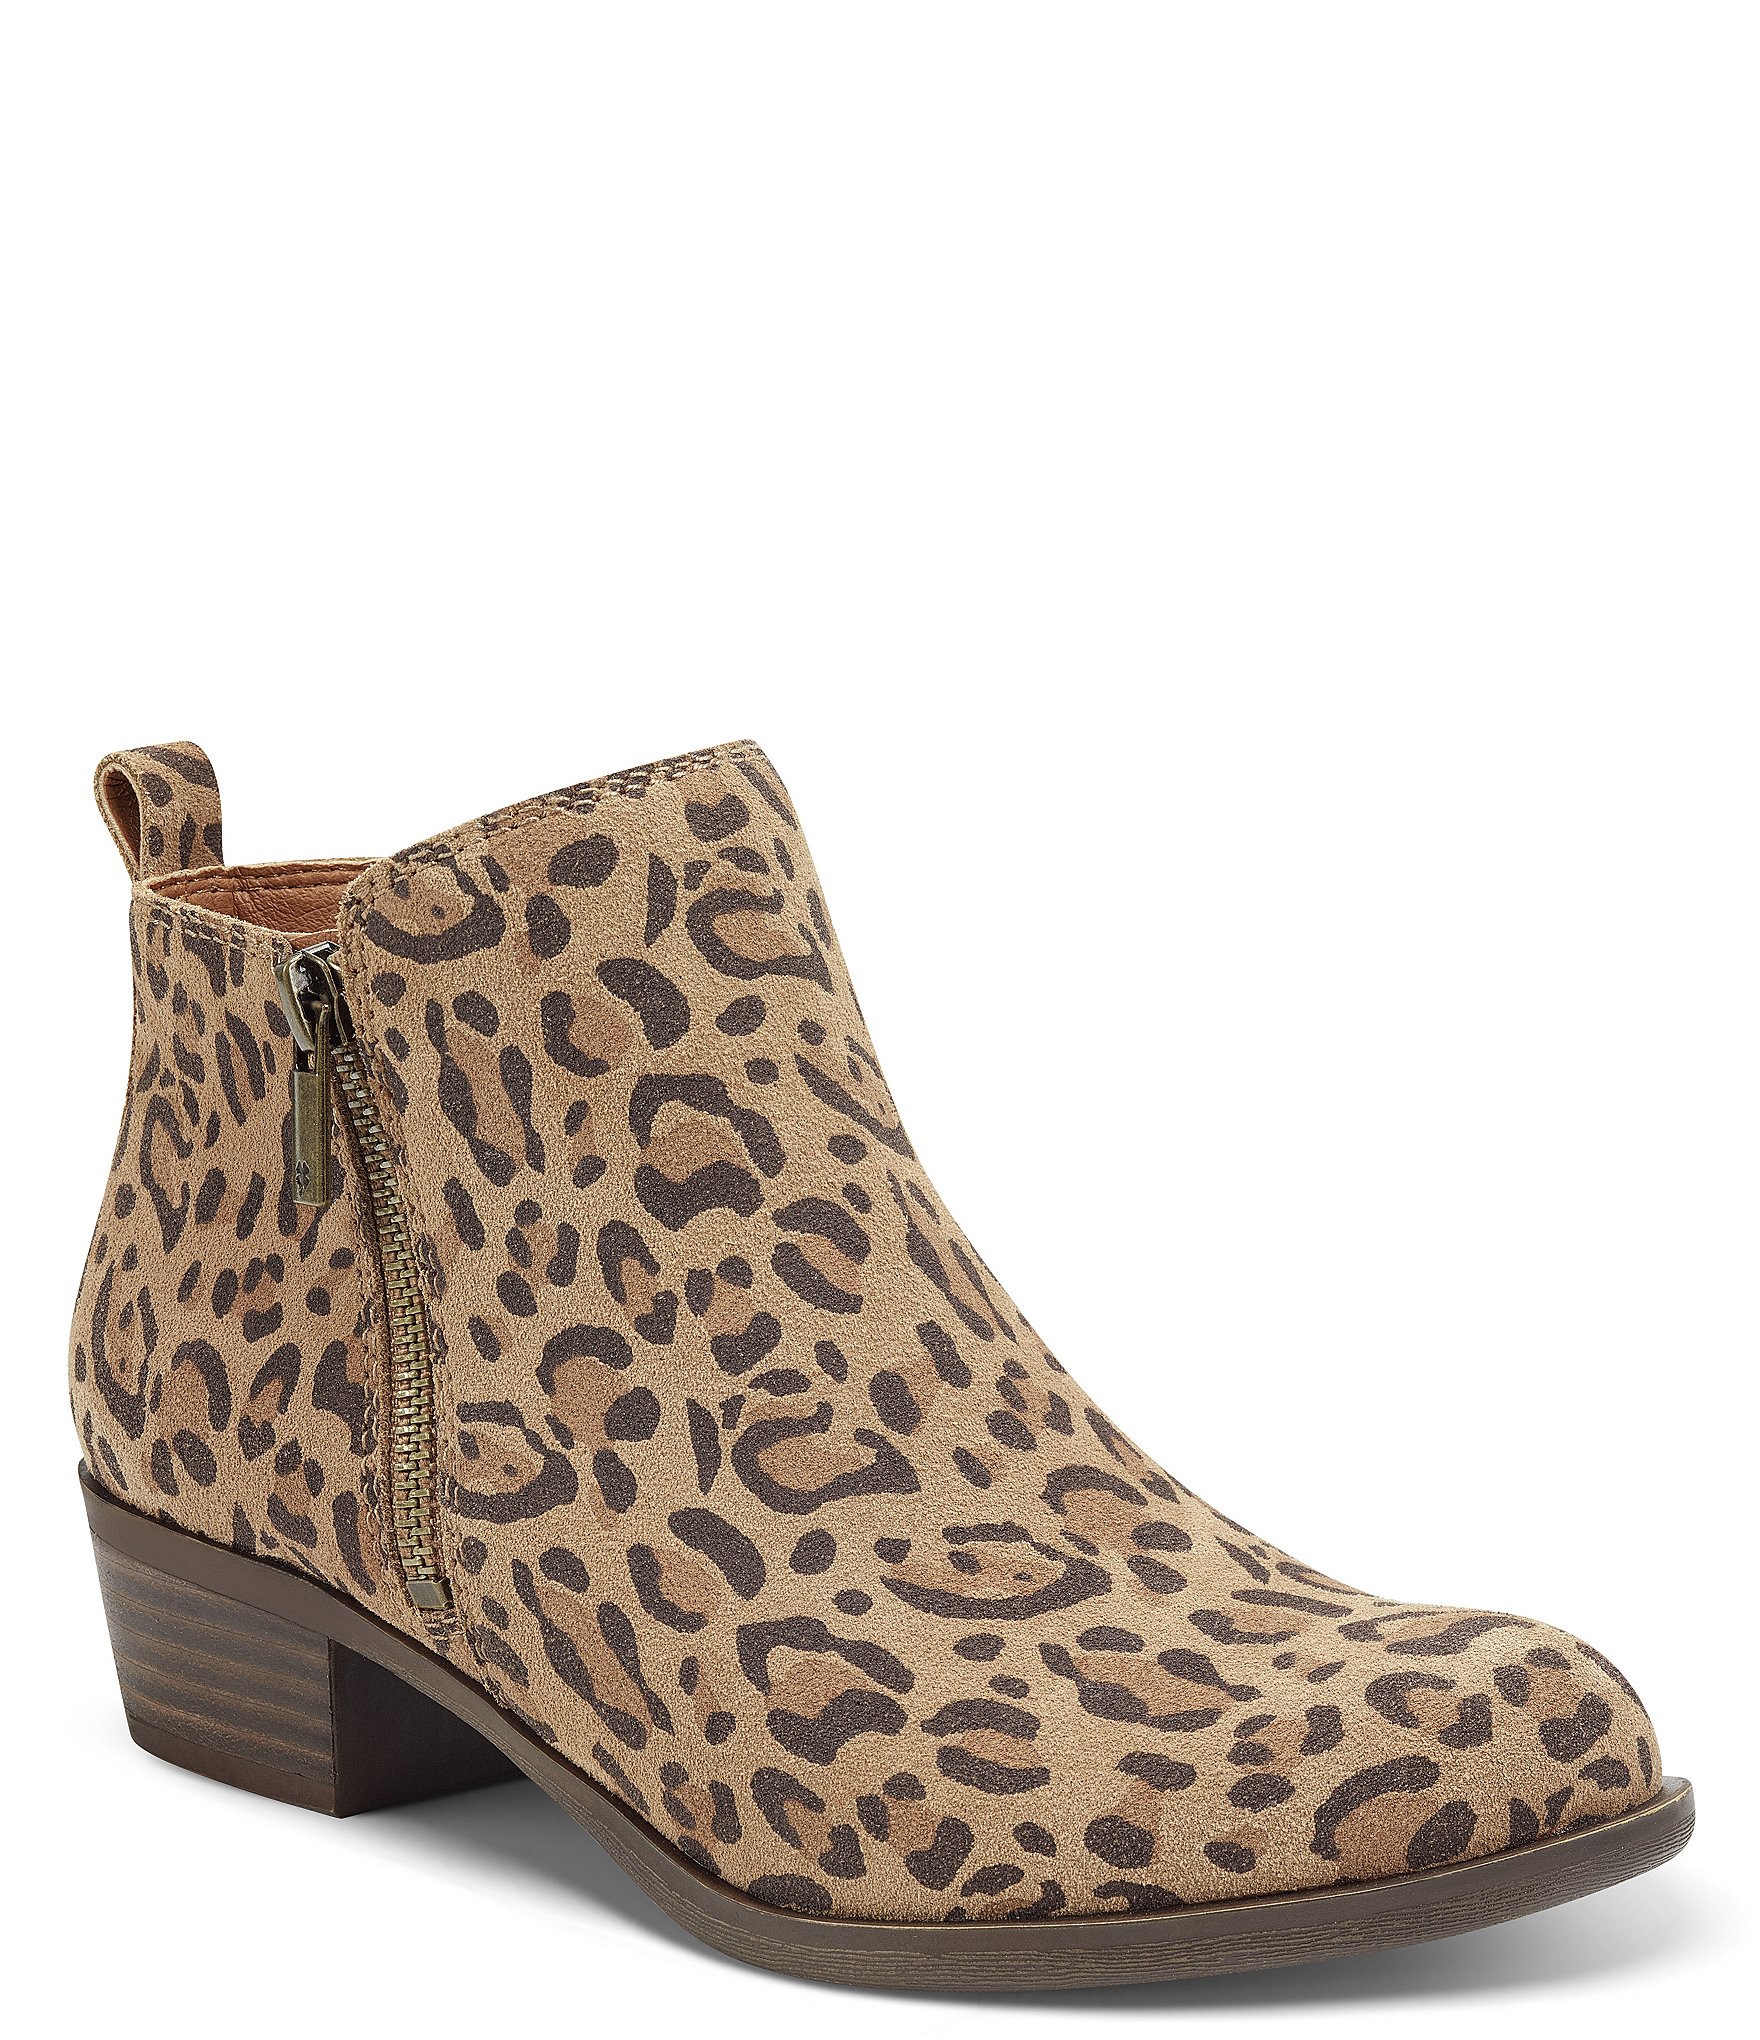 Lucky Brand Leopard Print Brown Ankle Boots Size 9 1/2 - 77% off